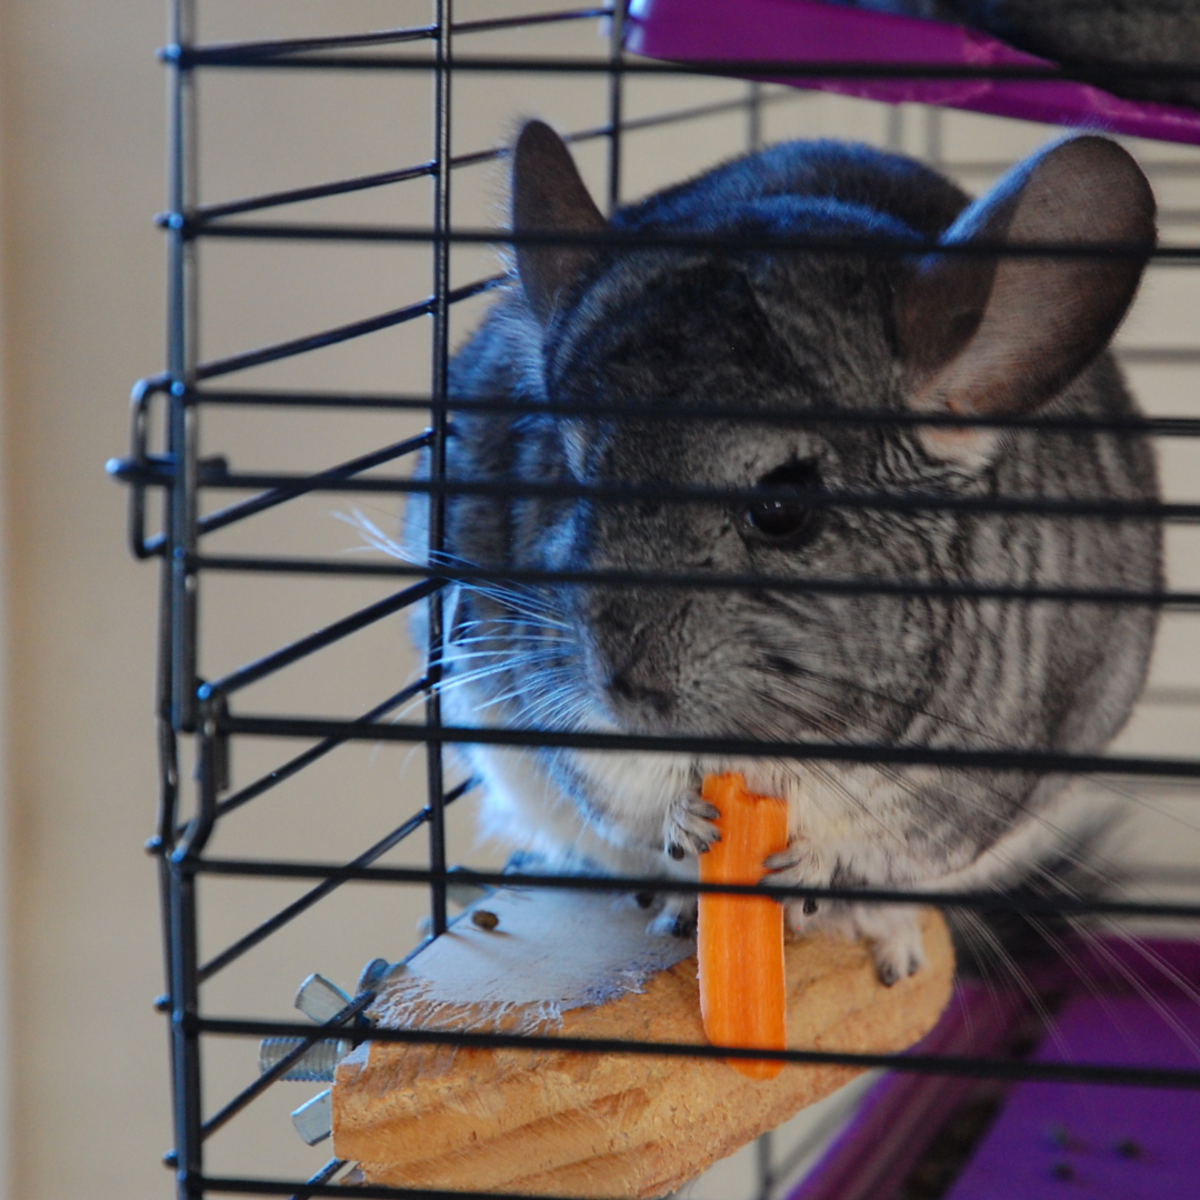 Creating a safe living space for your chinchilla helps to prevent injury.